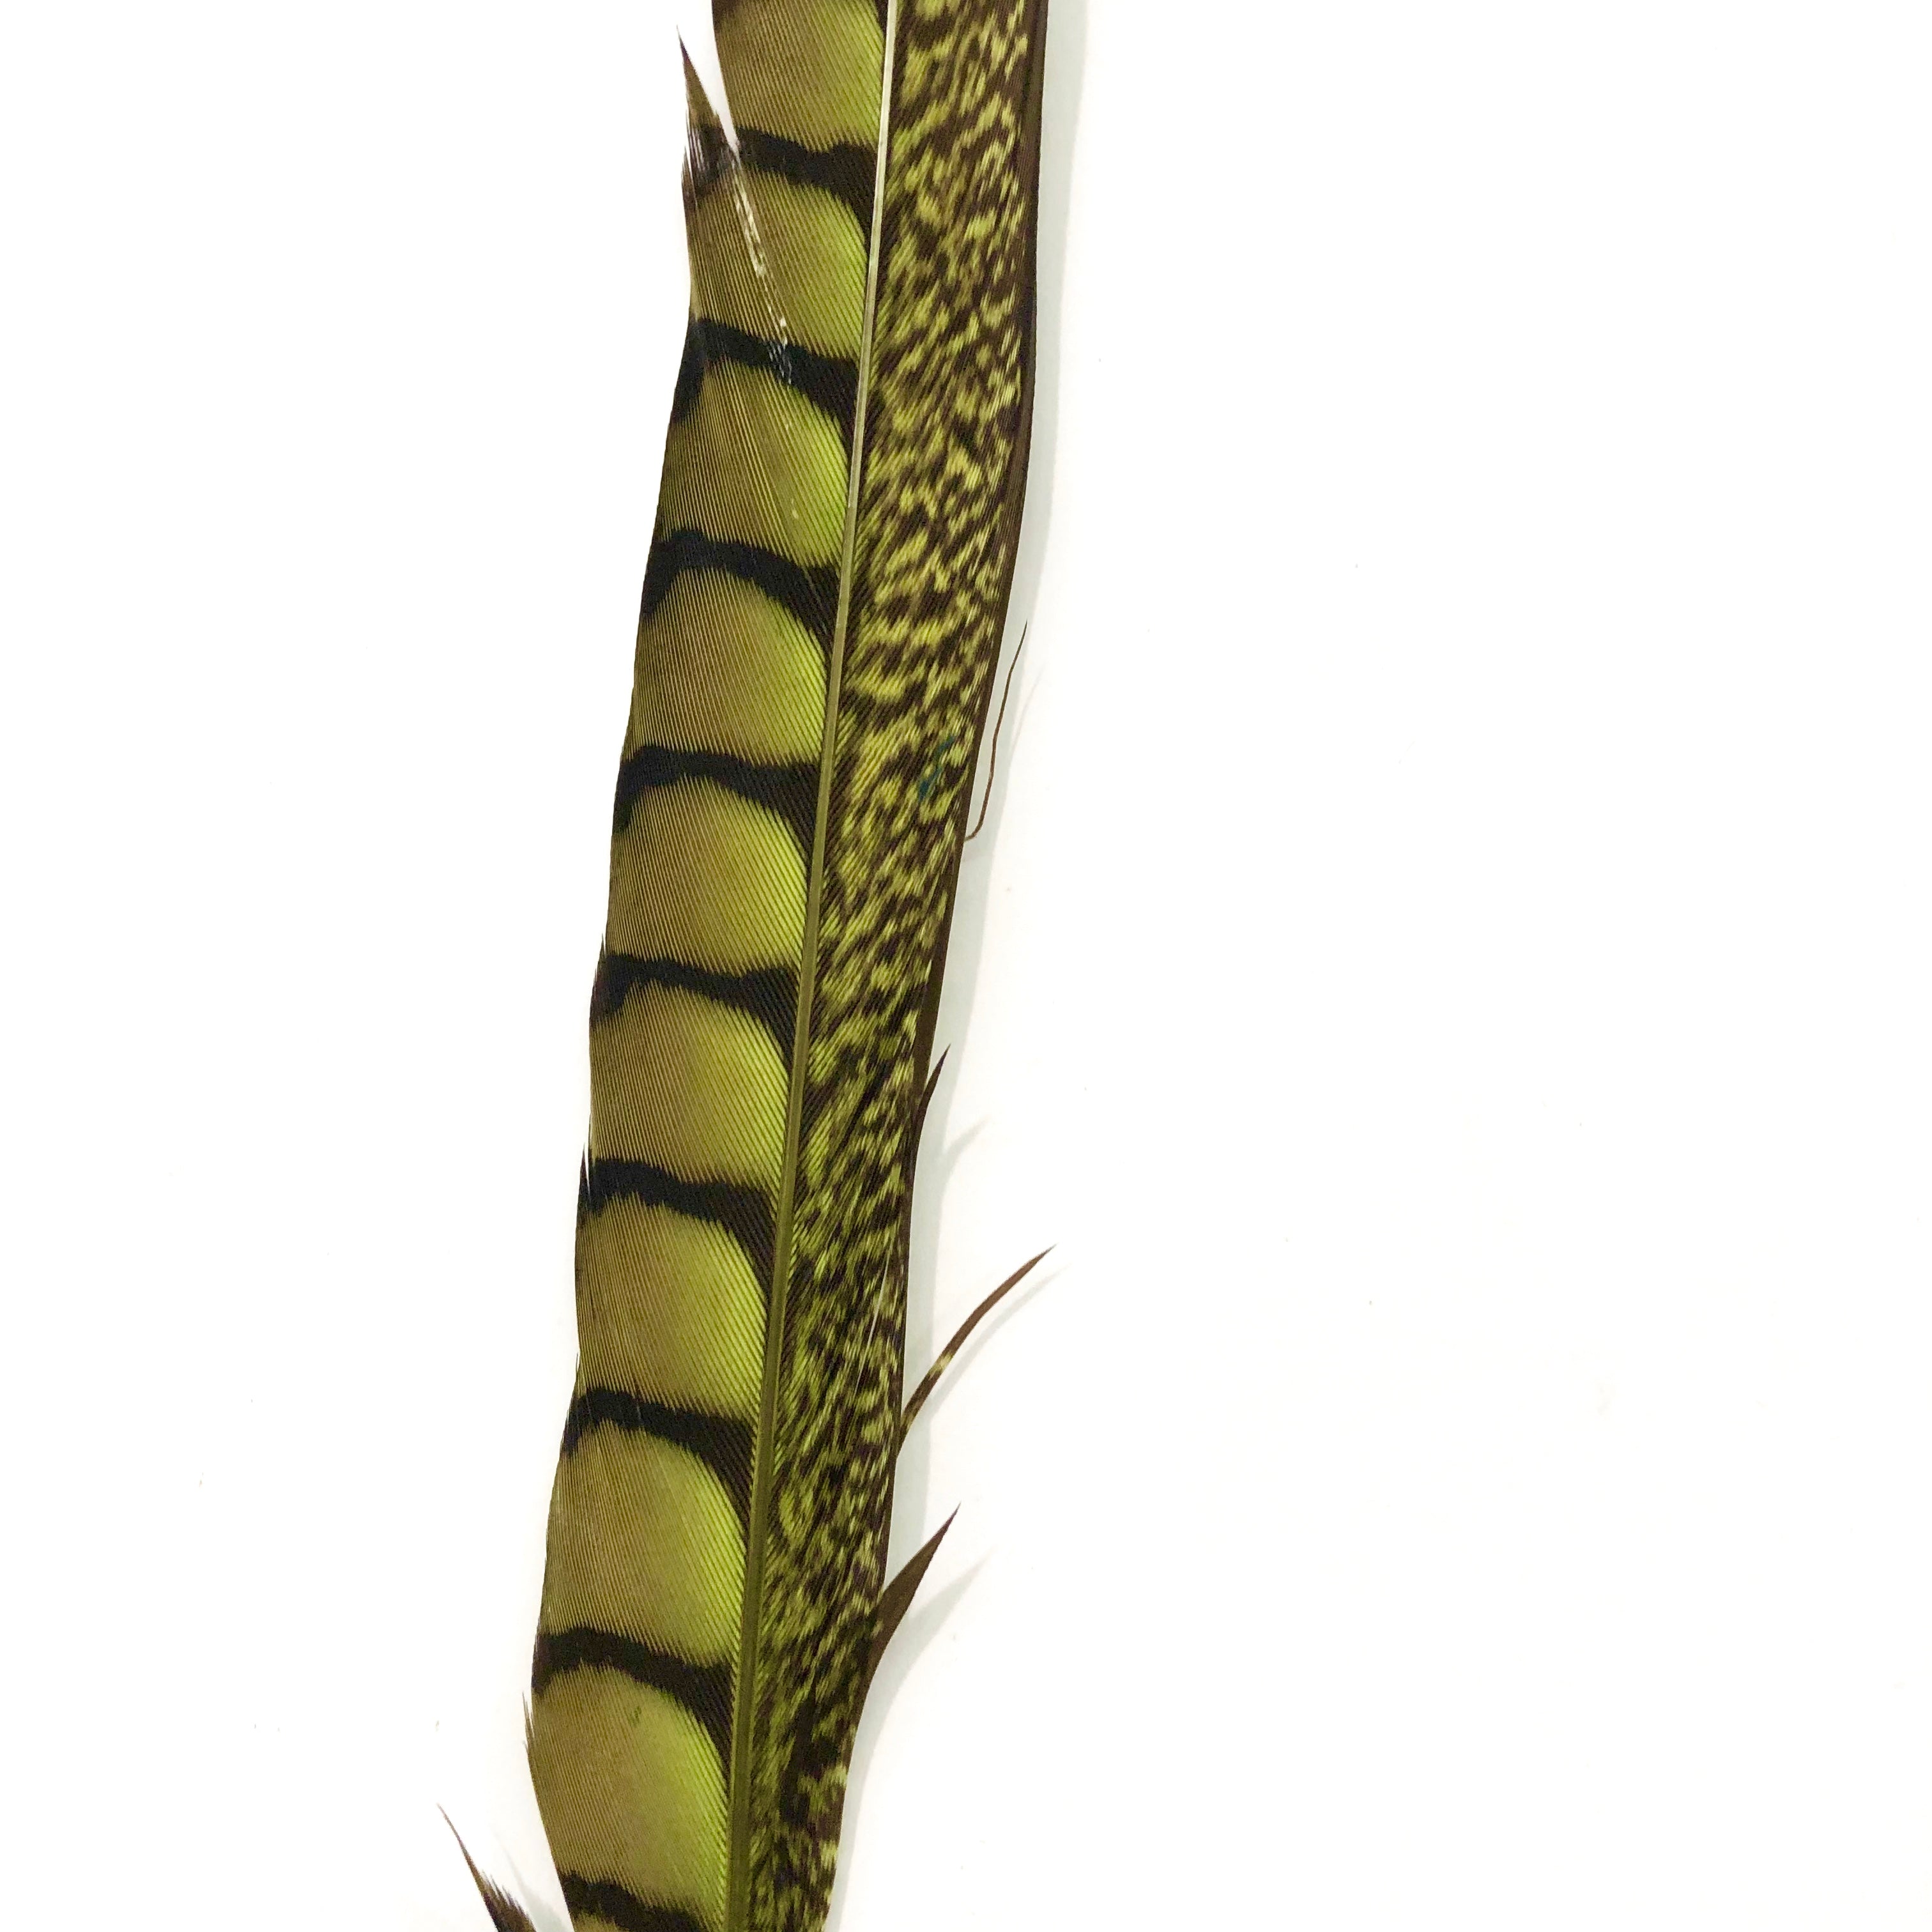 10" to 20" Lady Amherst Pheasant Side Tail Feather - Lime Green